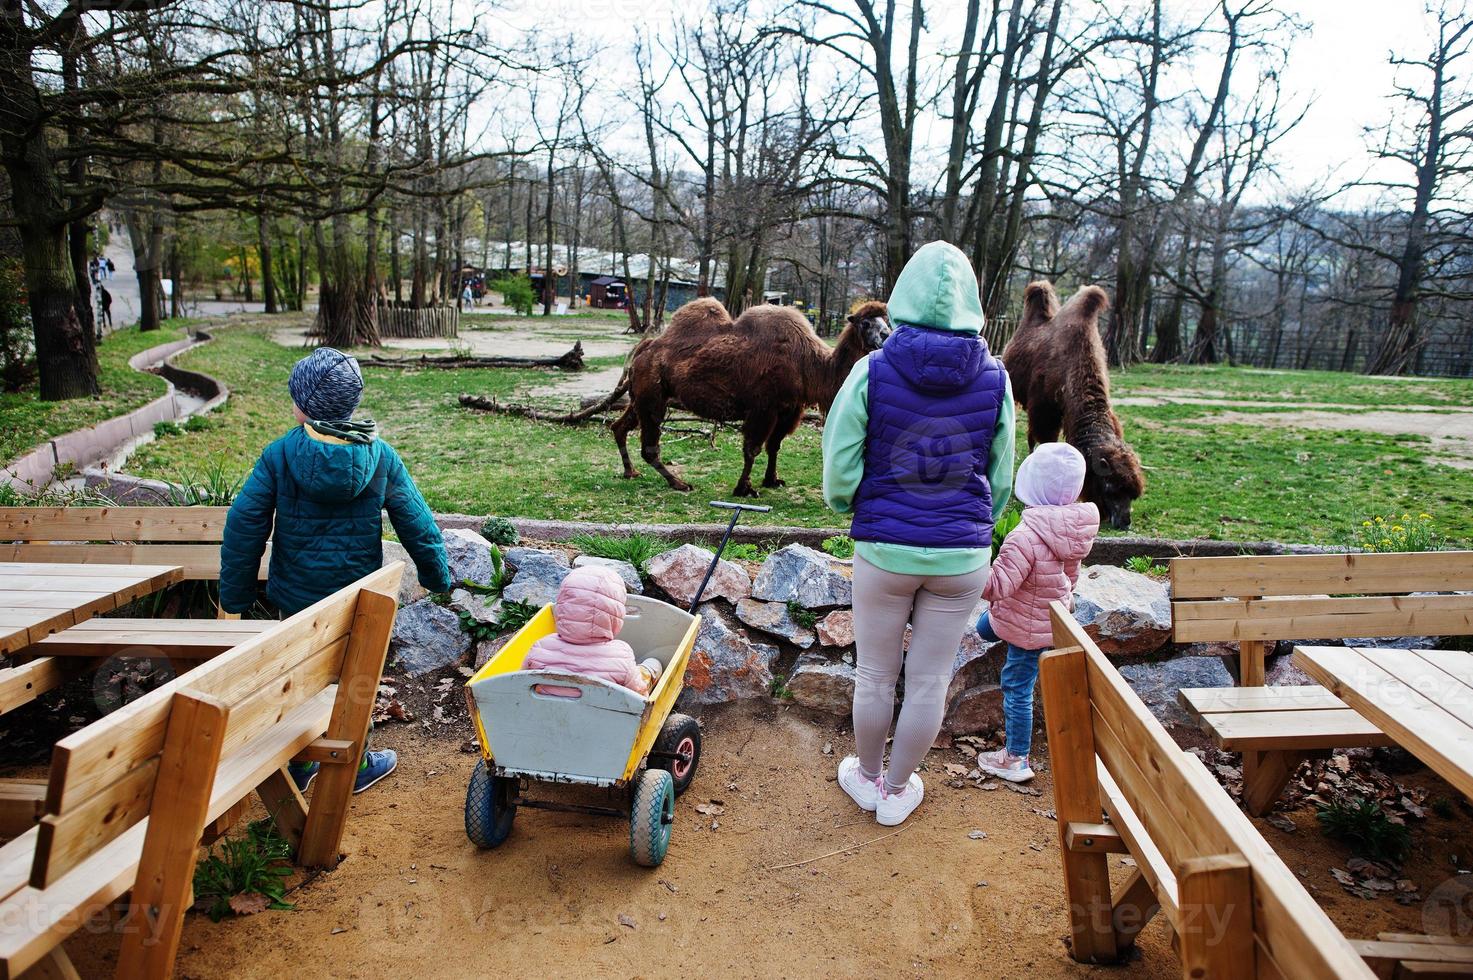 Mother with four kids discovering and watching camels at zoo. photo